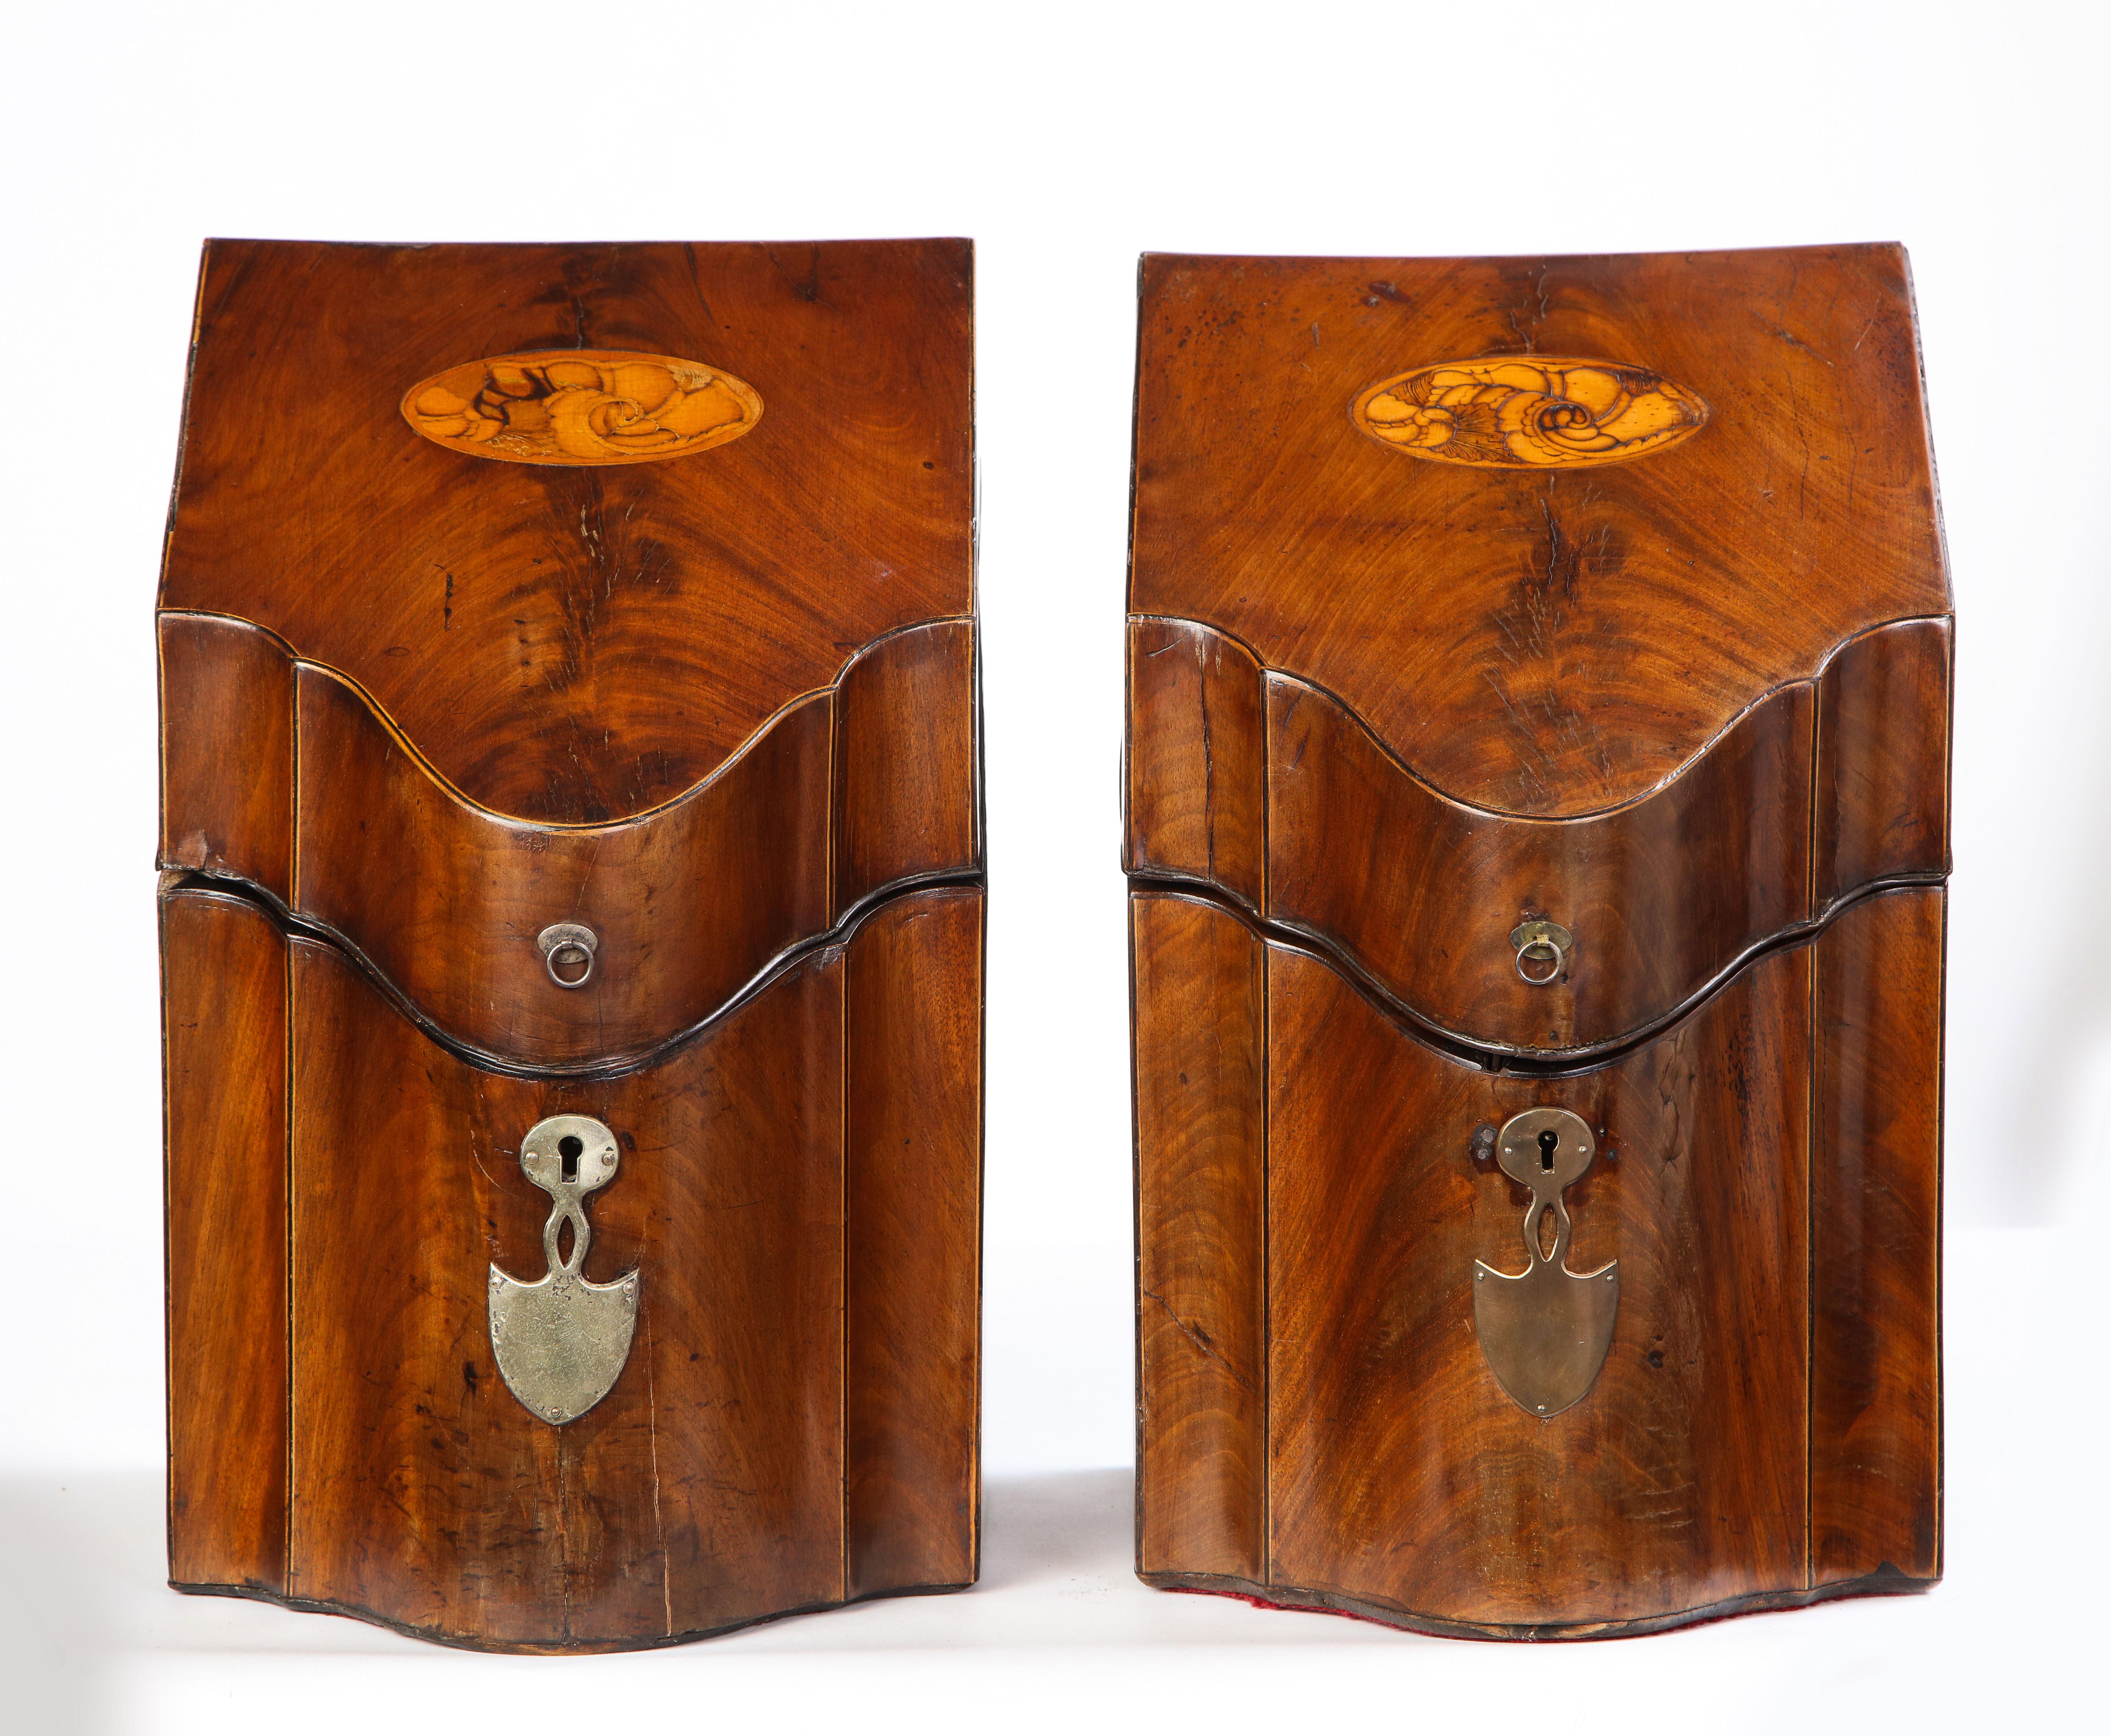 Pair of George III inlaid satinwood cutlery boxes, late 18th century. Each with a sloping serpentine-front hinged top inlaid with a decorative shell design, metal escutcheon plates, and enclosing a fitted interior.

Some of the most celebrated